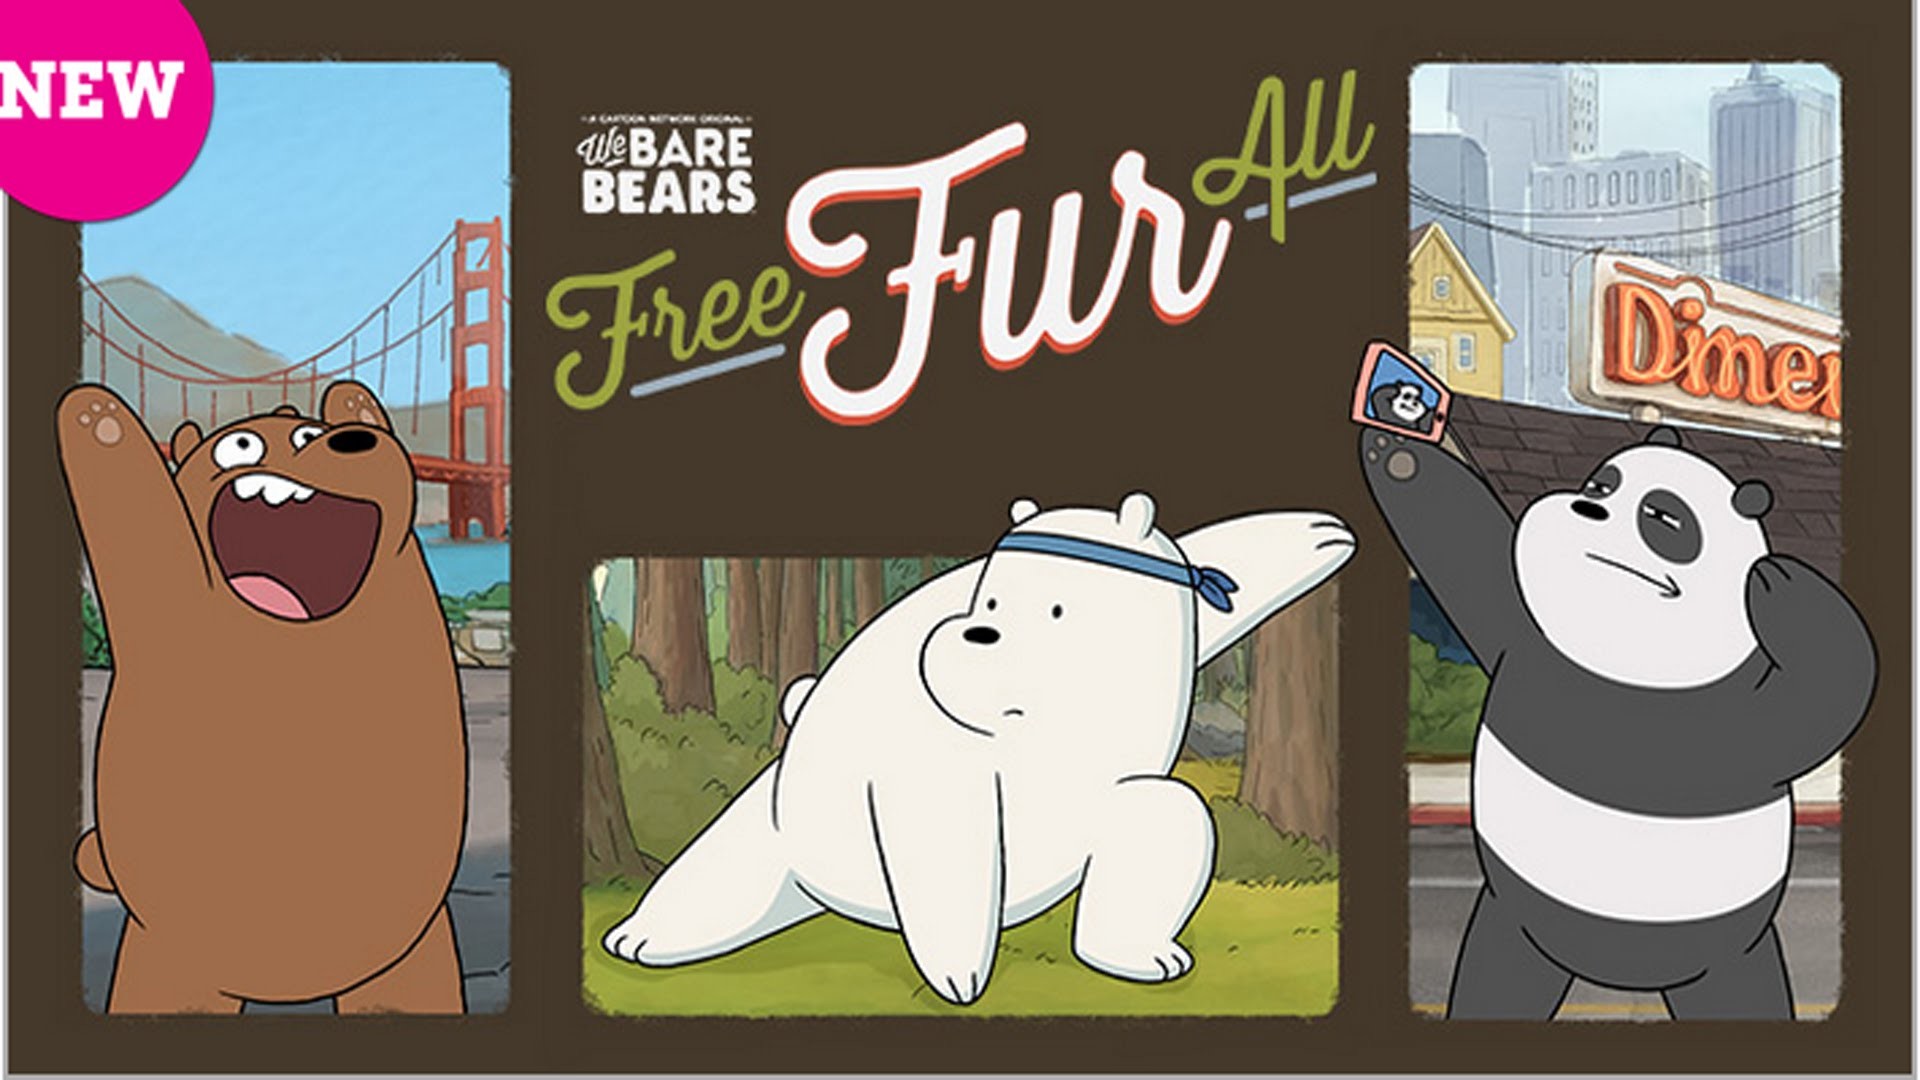 Ice Bear Rules All Free Fur All We Bare Bears Cartoon Network Games